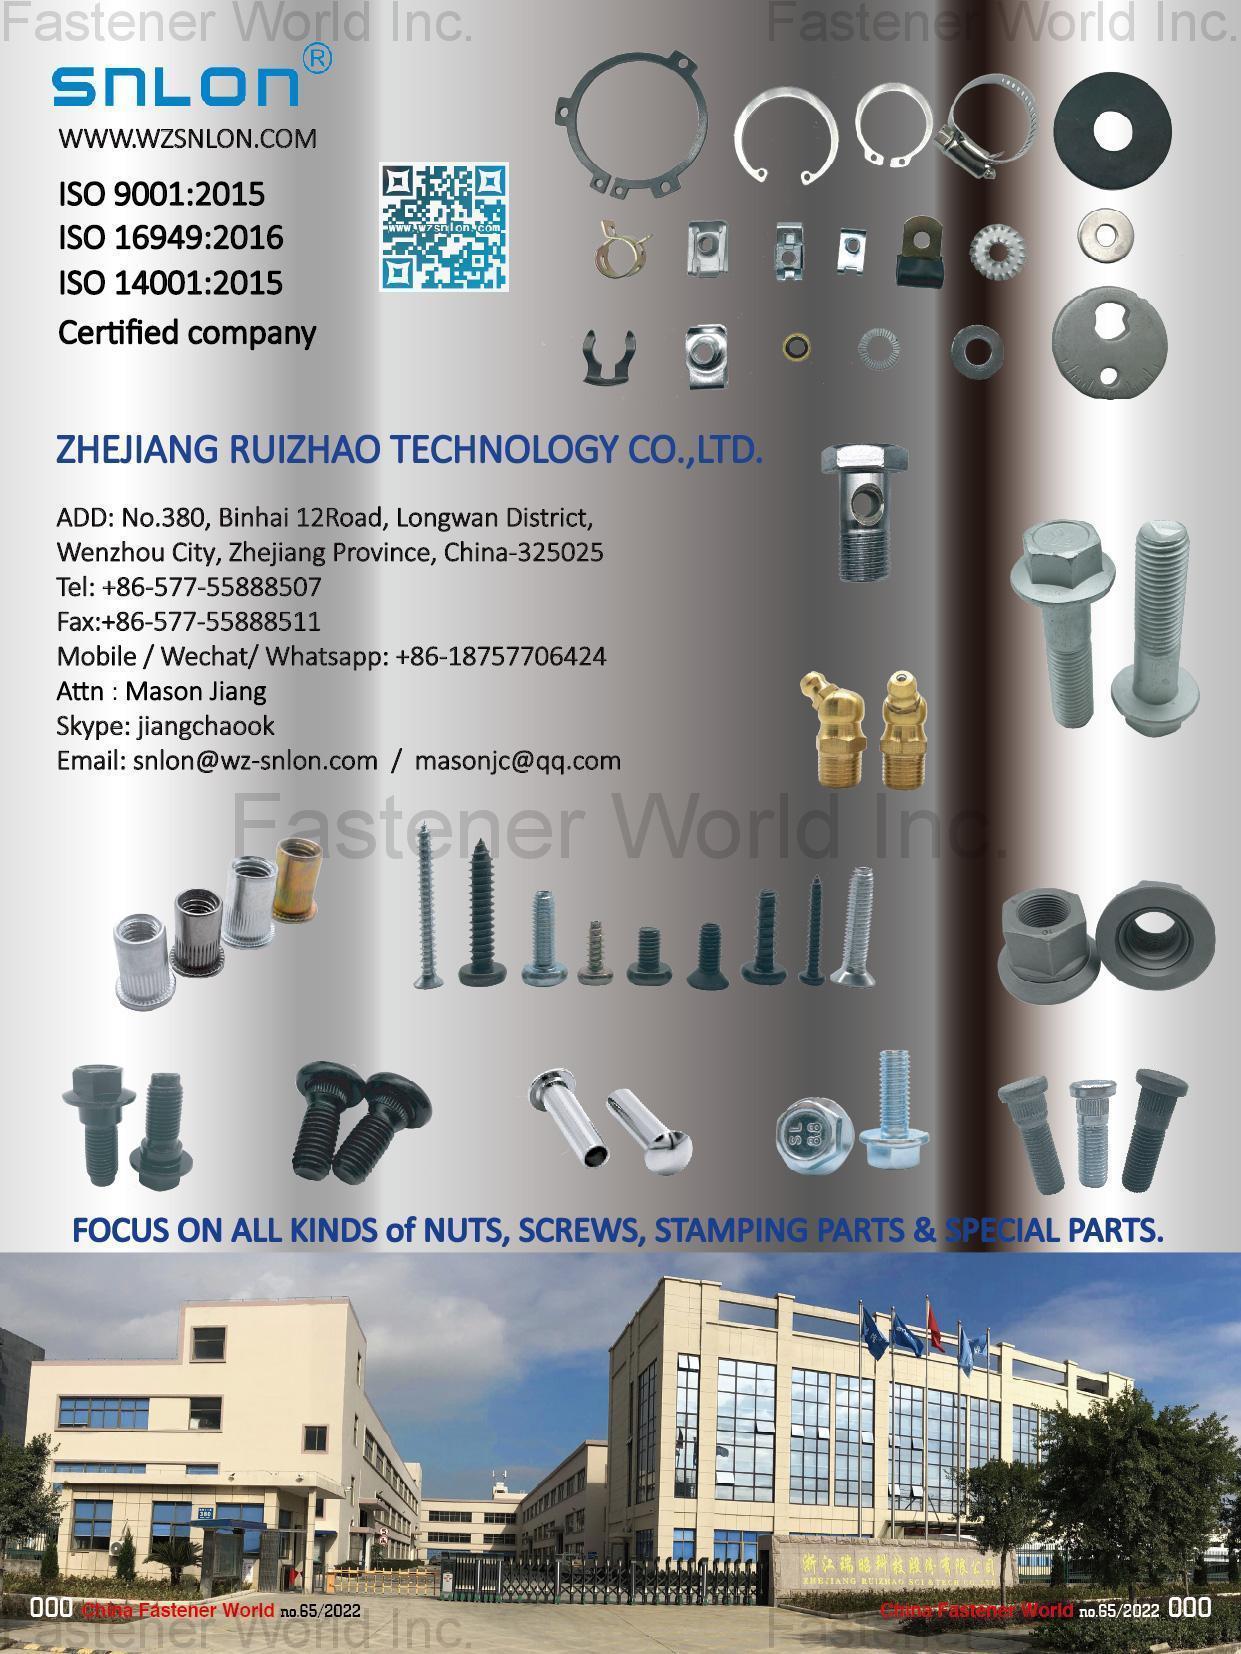 Zhejiang Ruizhao Technology Co., Ltd. , Nuts, Screws, Stamping Parts & Special Parts